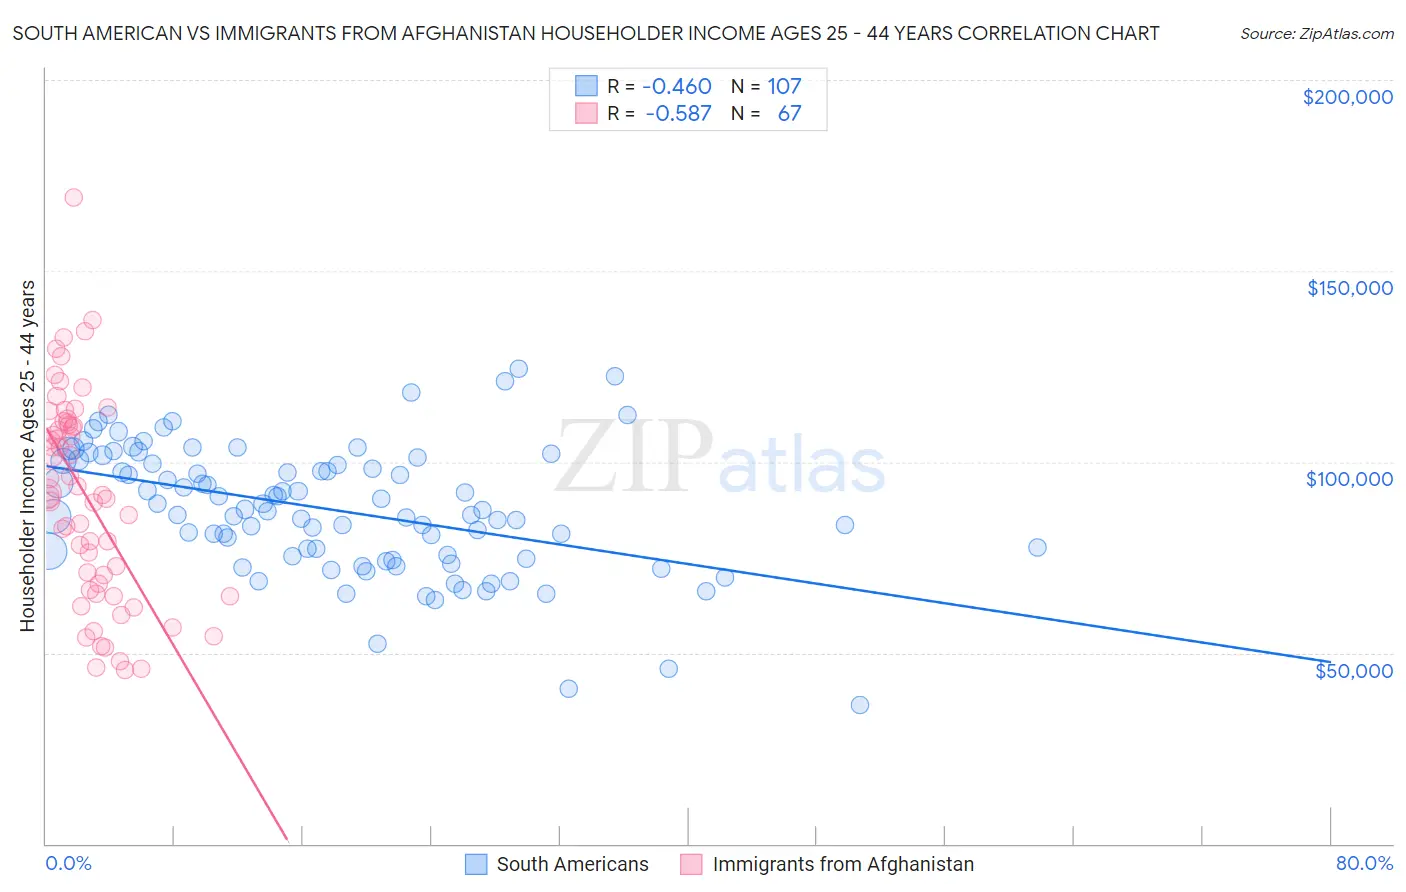 South American vs Immigrants from Afghanistan Householder Income Ages 25 - 44 years